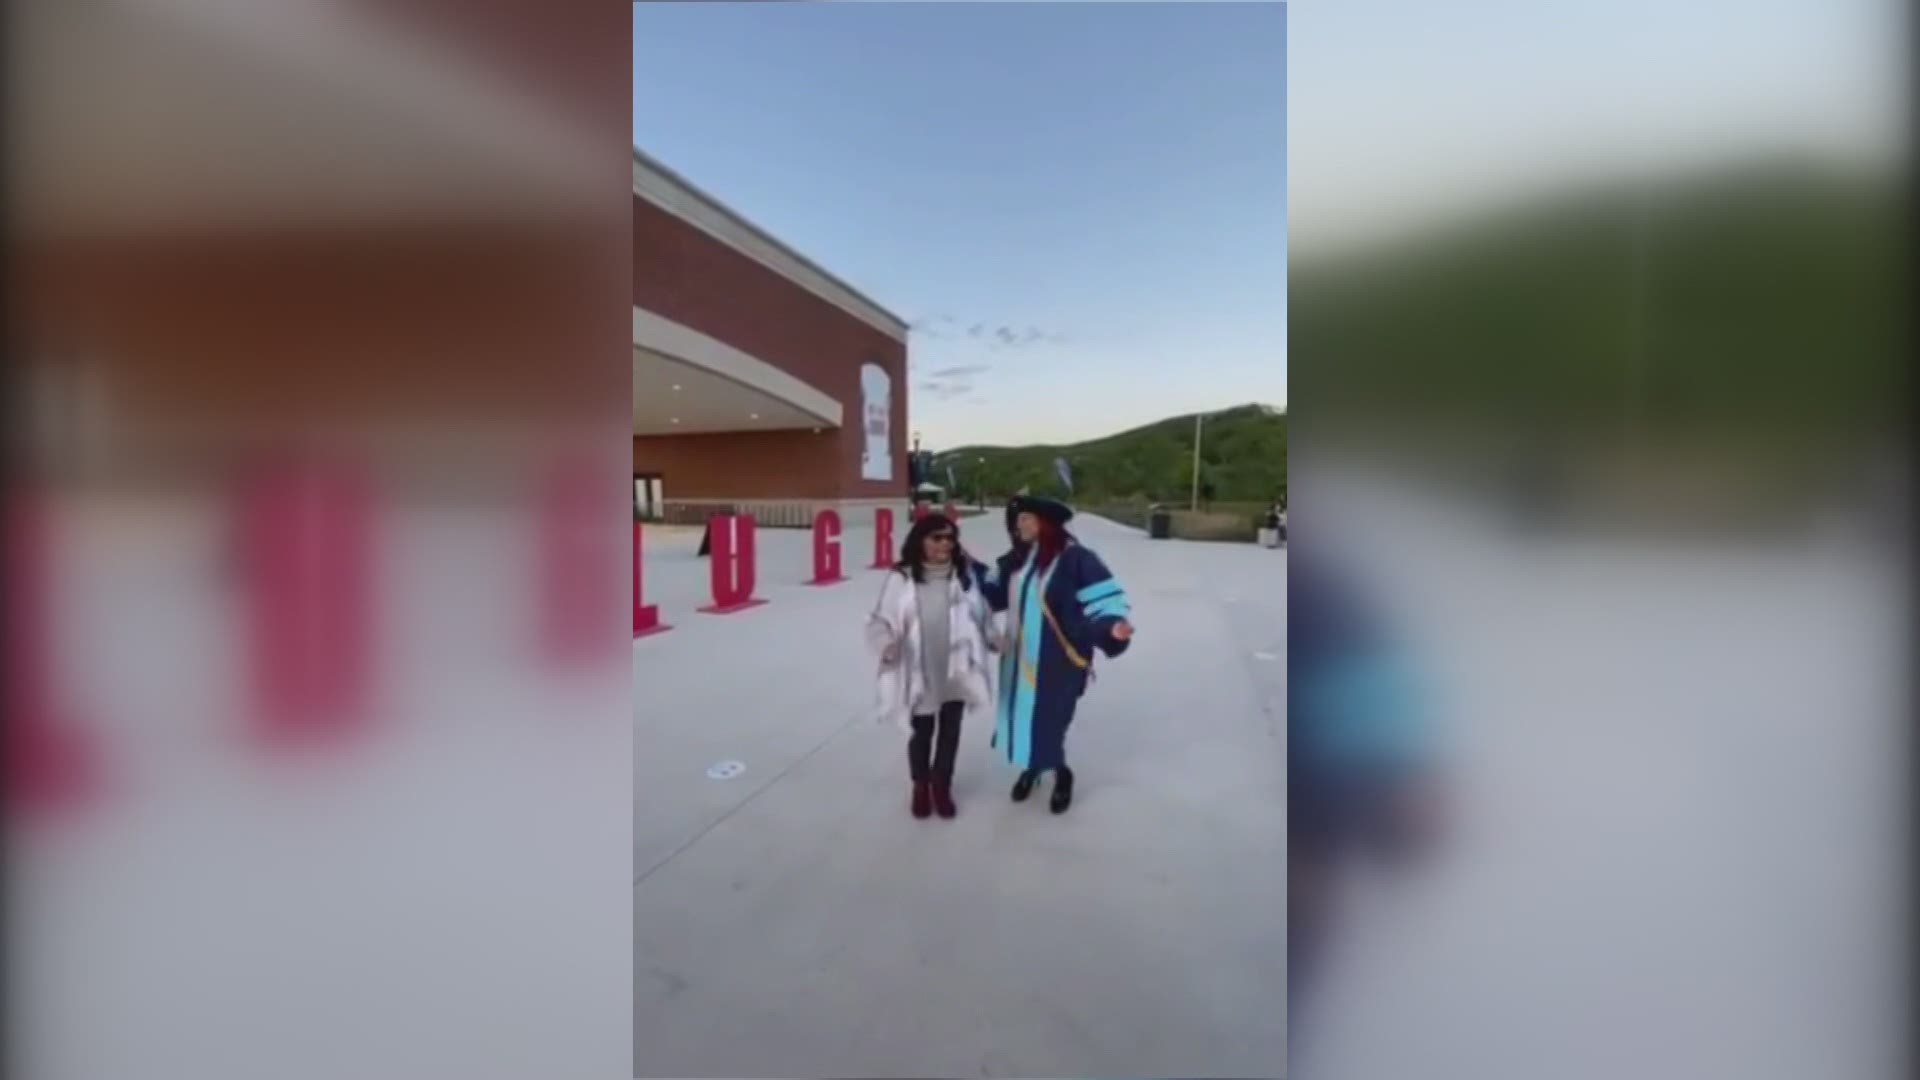 This woman just earned her doctorate, and she's dancing with Mom to celebrate.